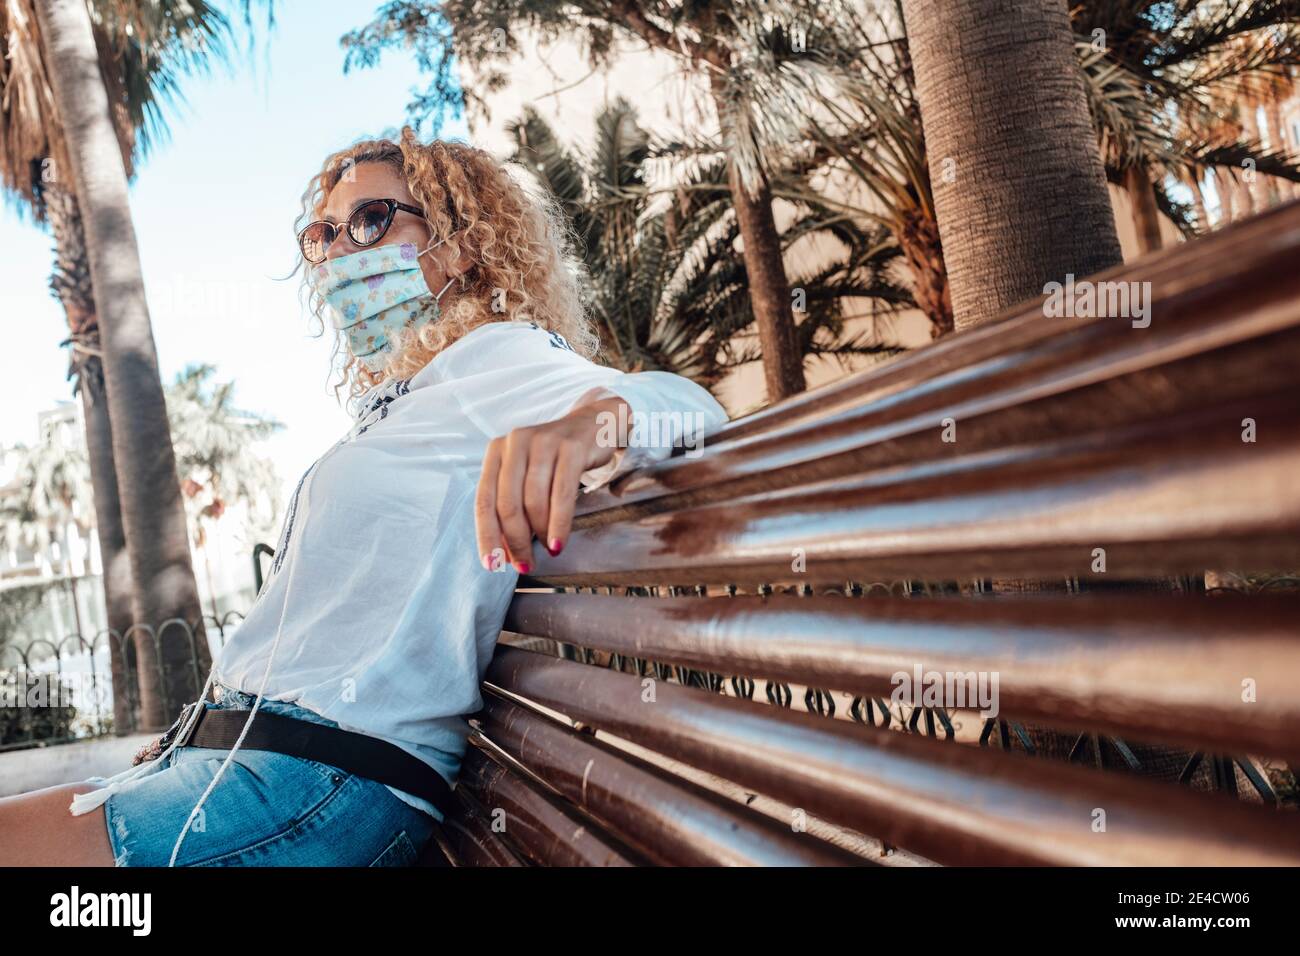 Woman sit down on a bench wearing medical face mask for coronavirus covid-19 protection outbreaks - concept of outdoor restrictions to fight pandemic contagion for health of people Stock Photo